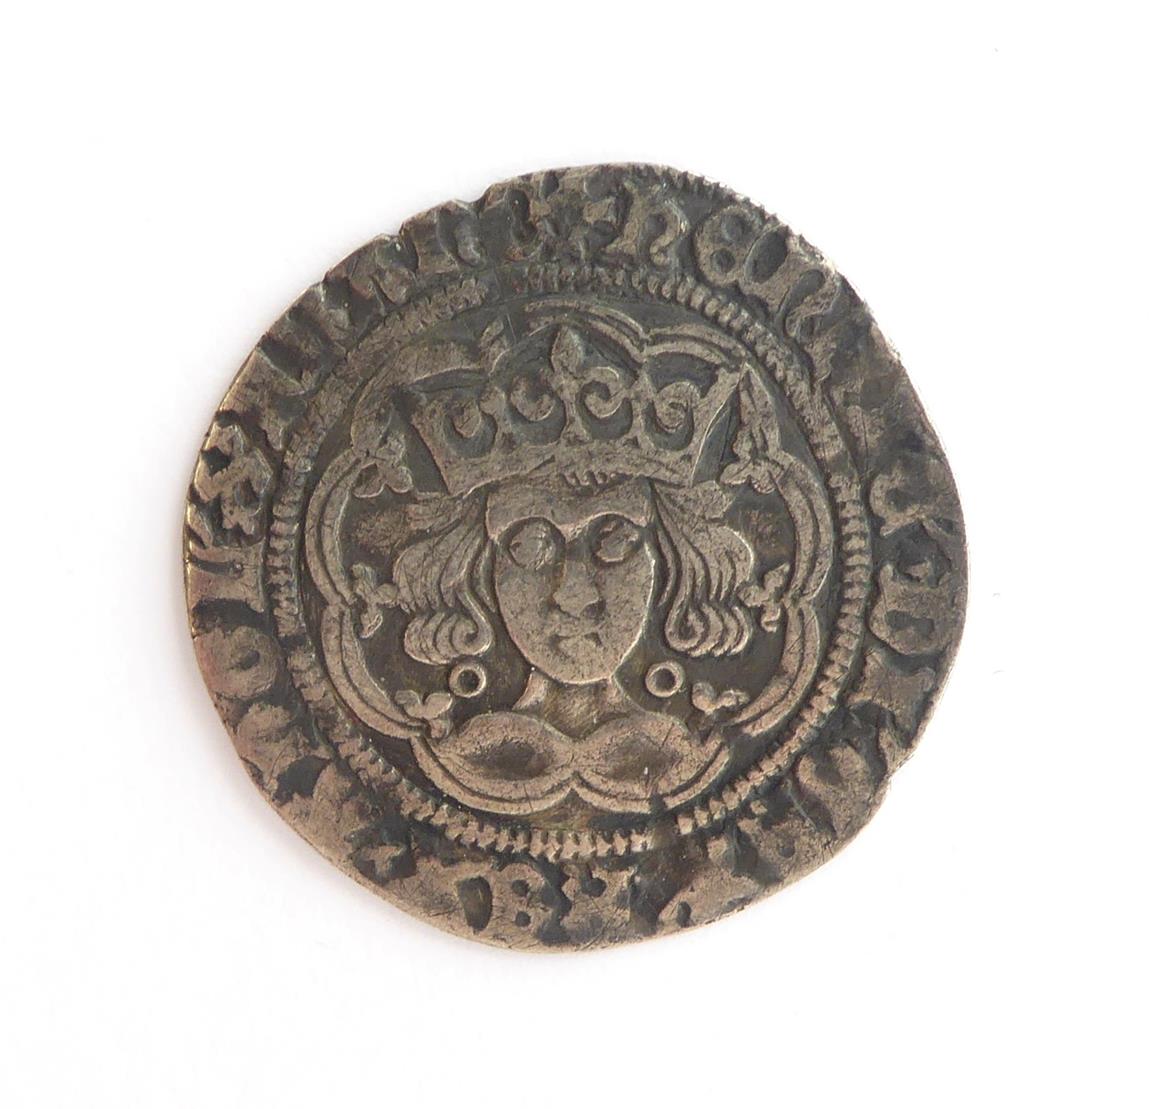 Henry VI Groat, annulet issue, Calais Mint, mm pierced cross, annulets at neck & in two quarters